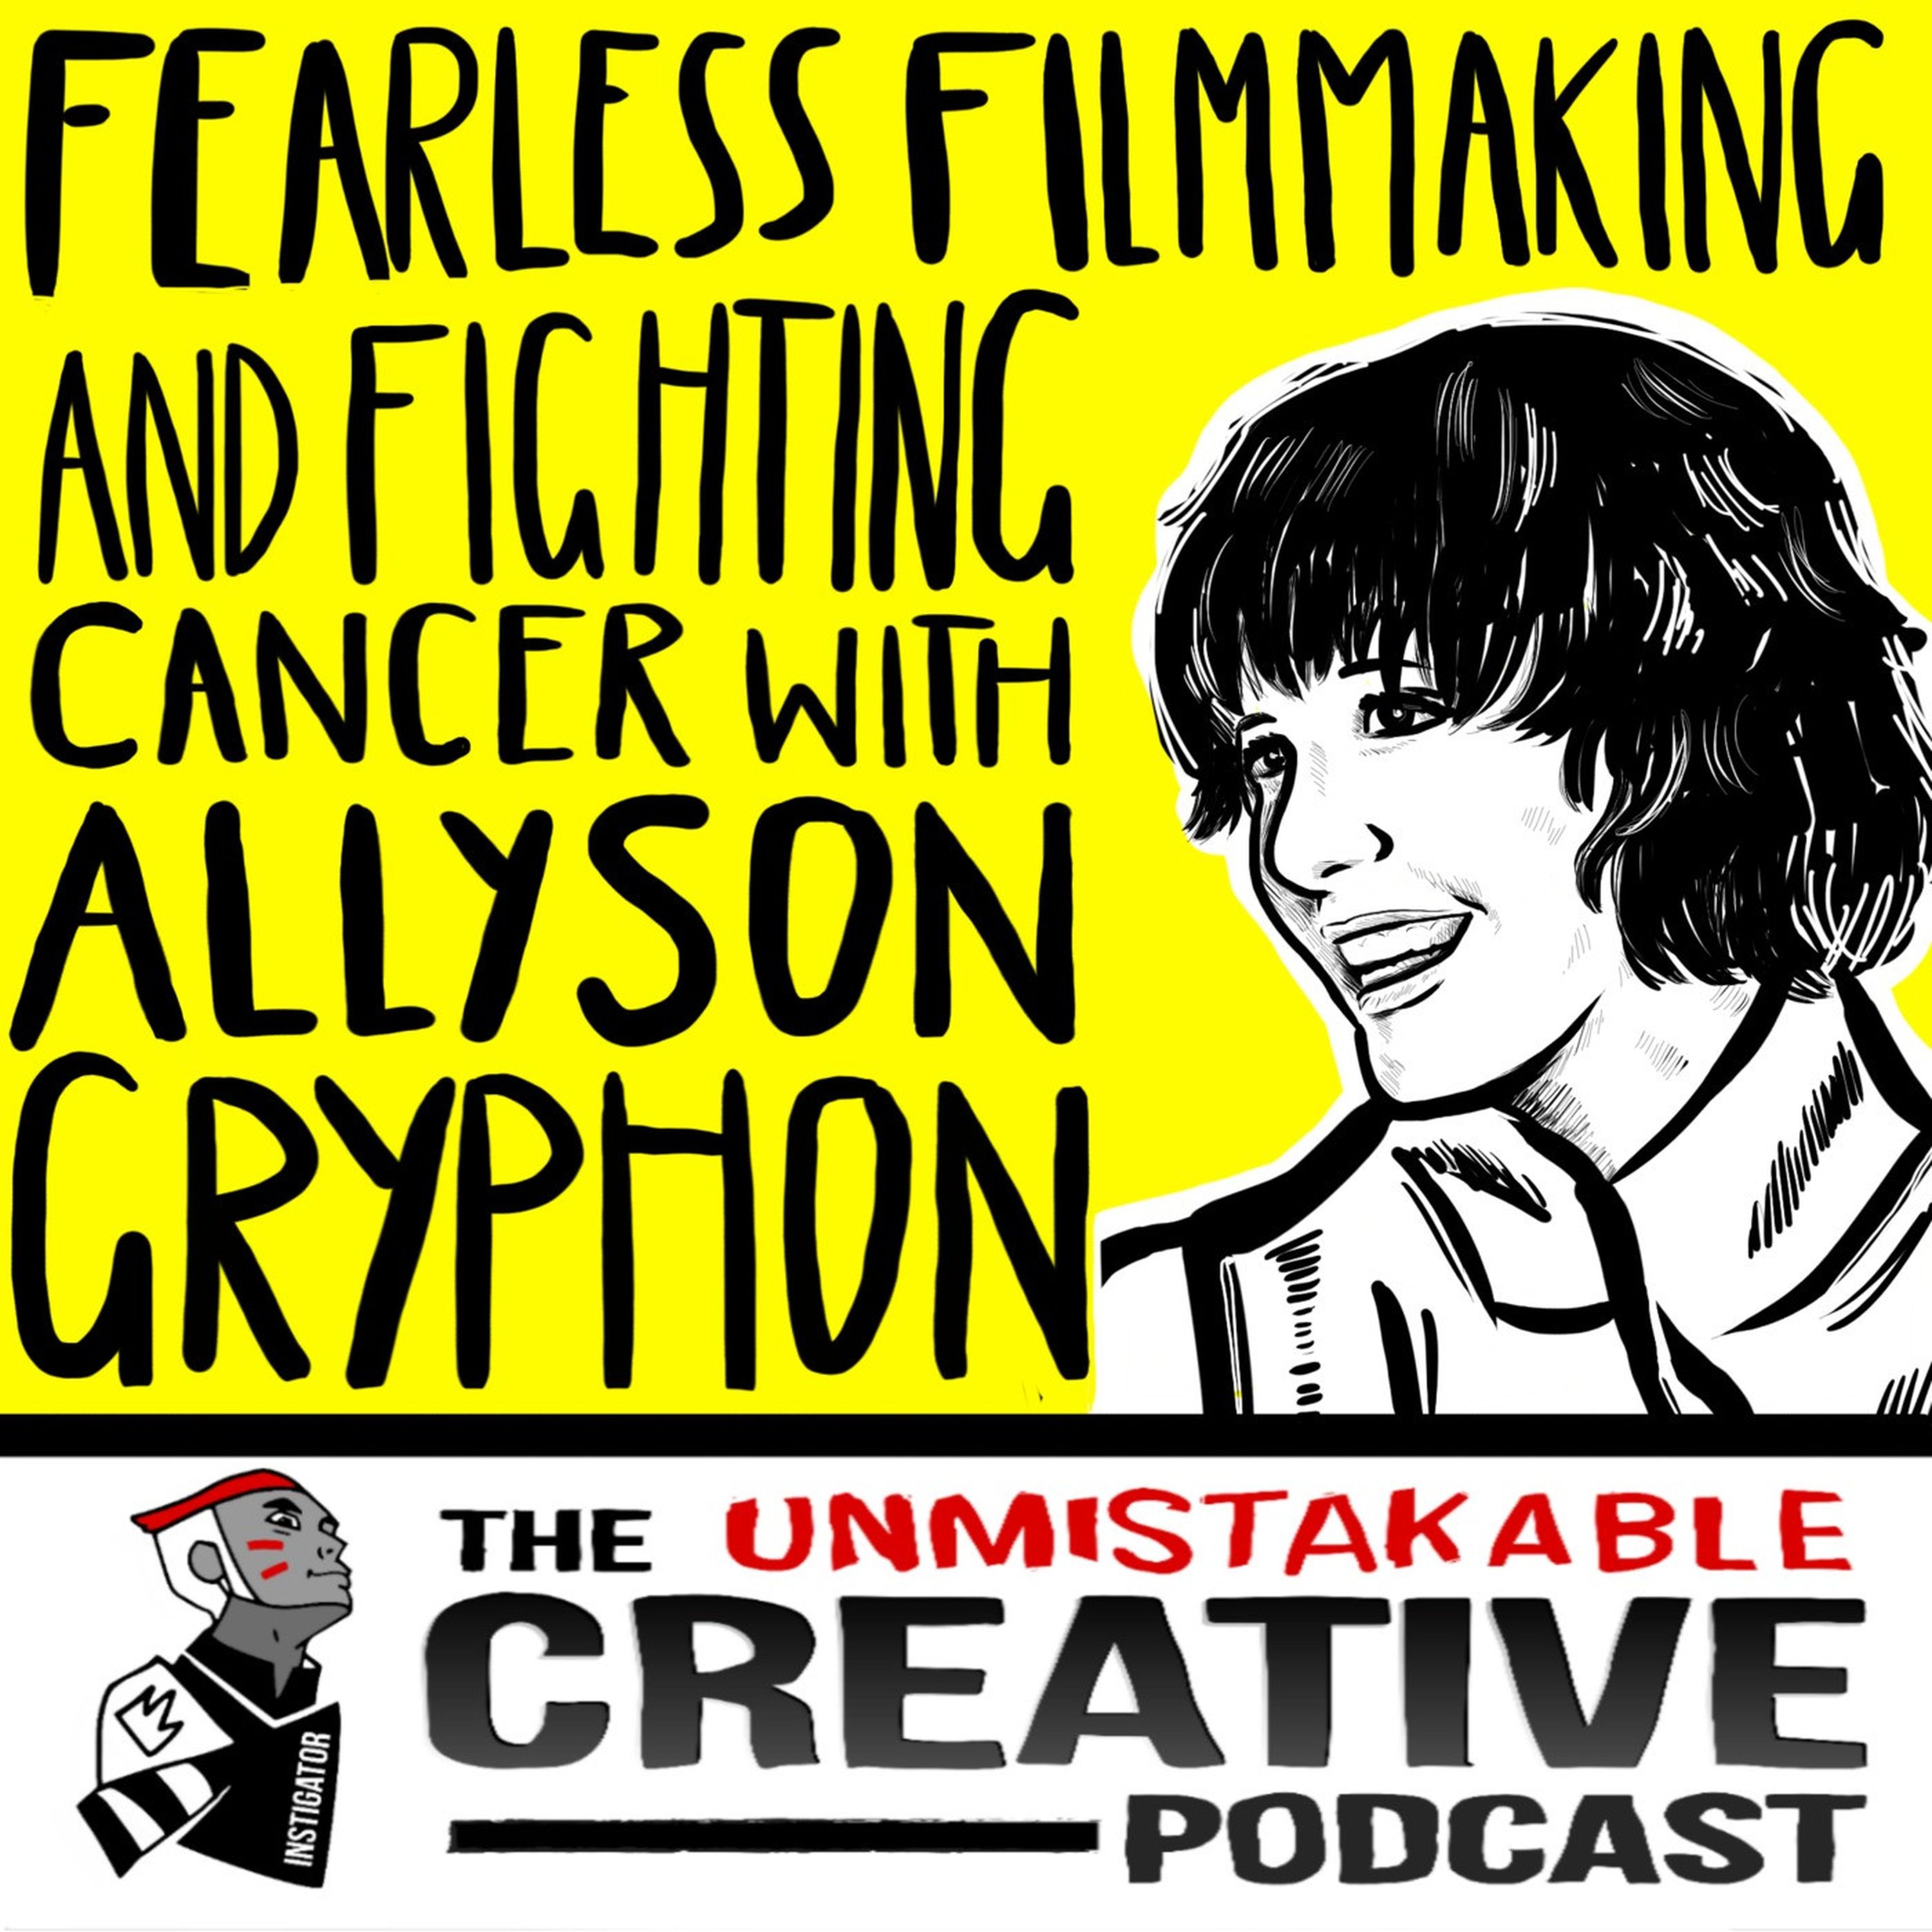 Fearless Filmmaking and Fighting Cancer with Allison Gryphon